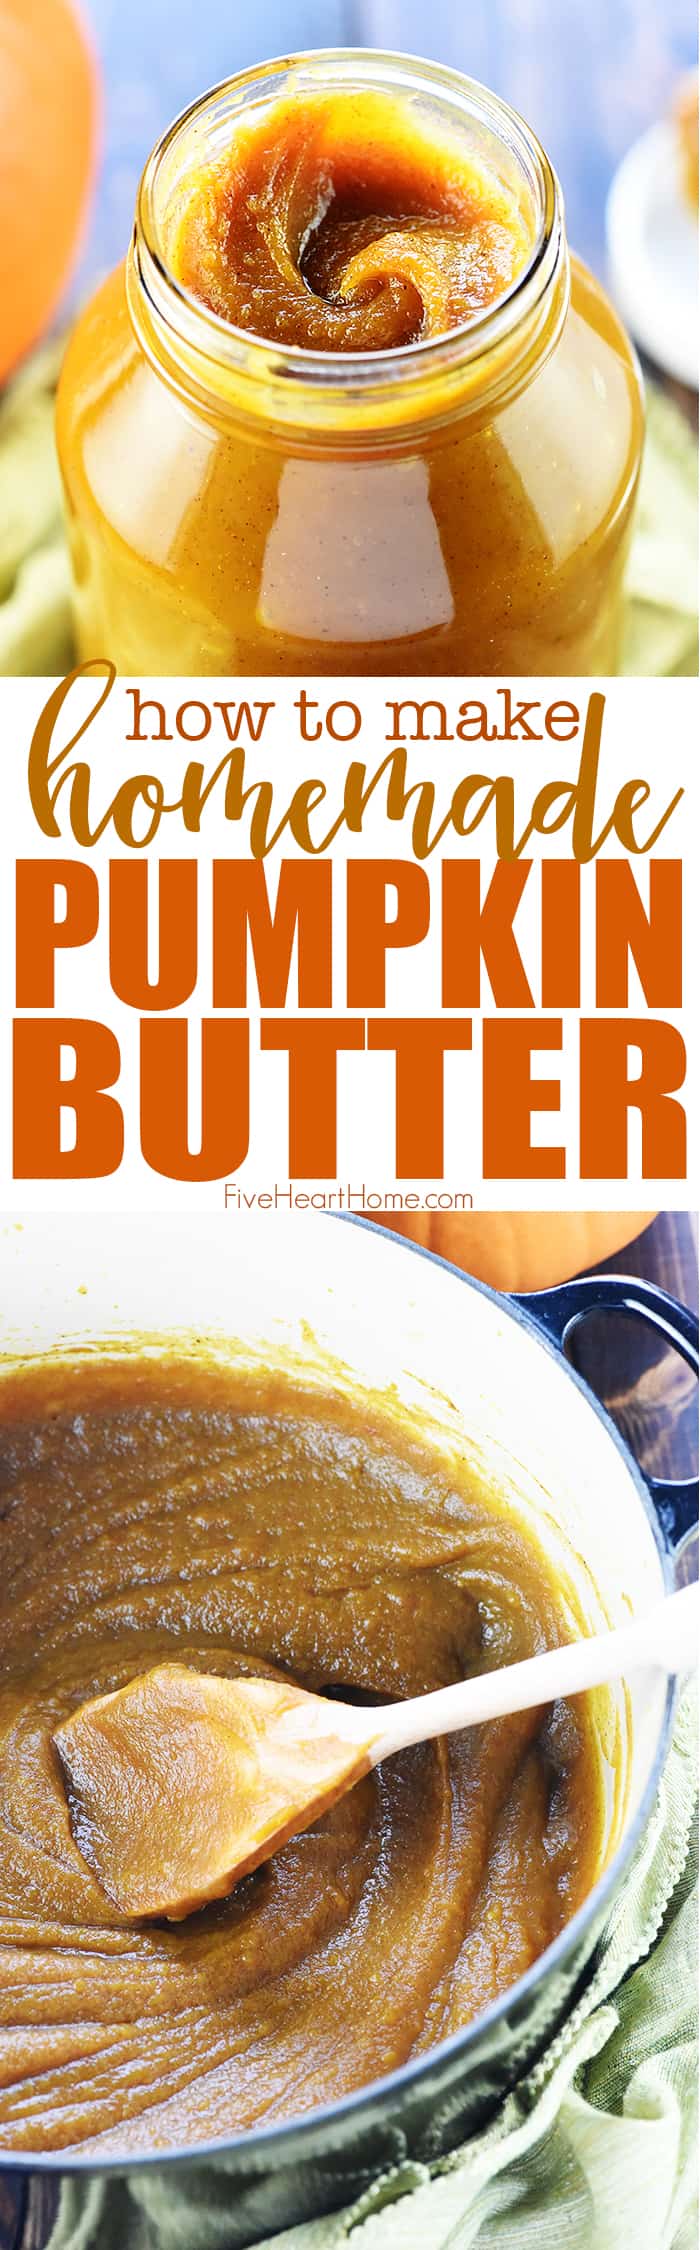 Homemade Pumpkin Butter collage with text